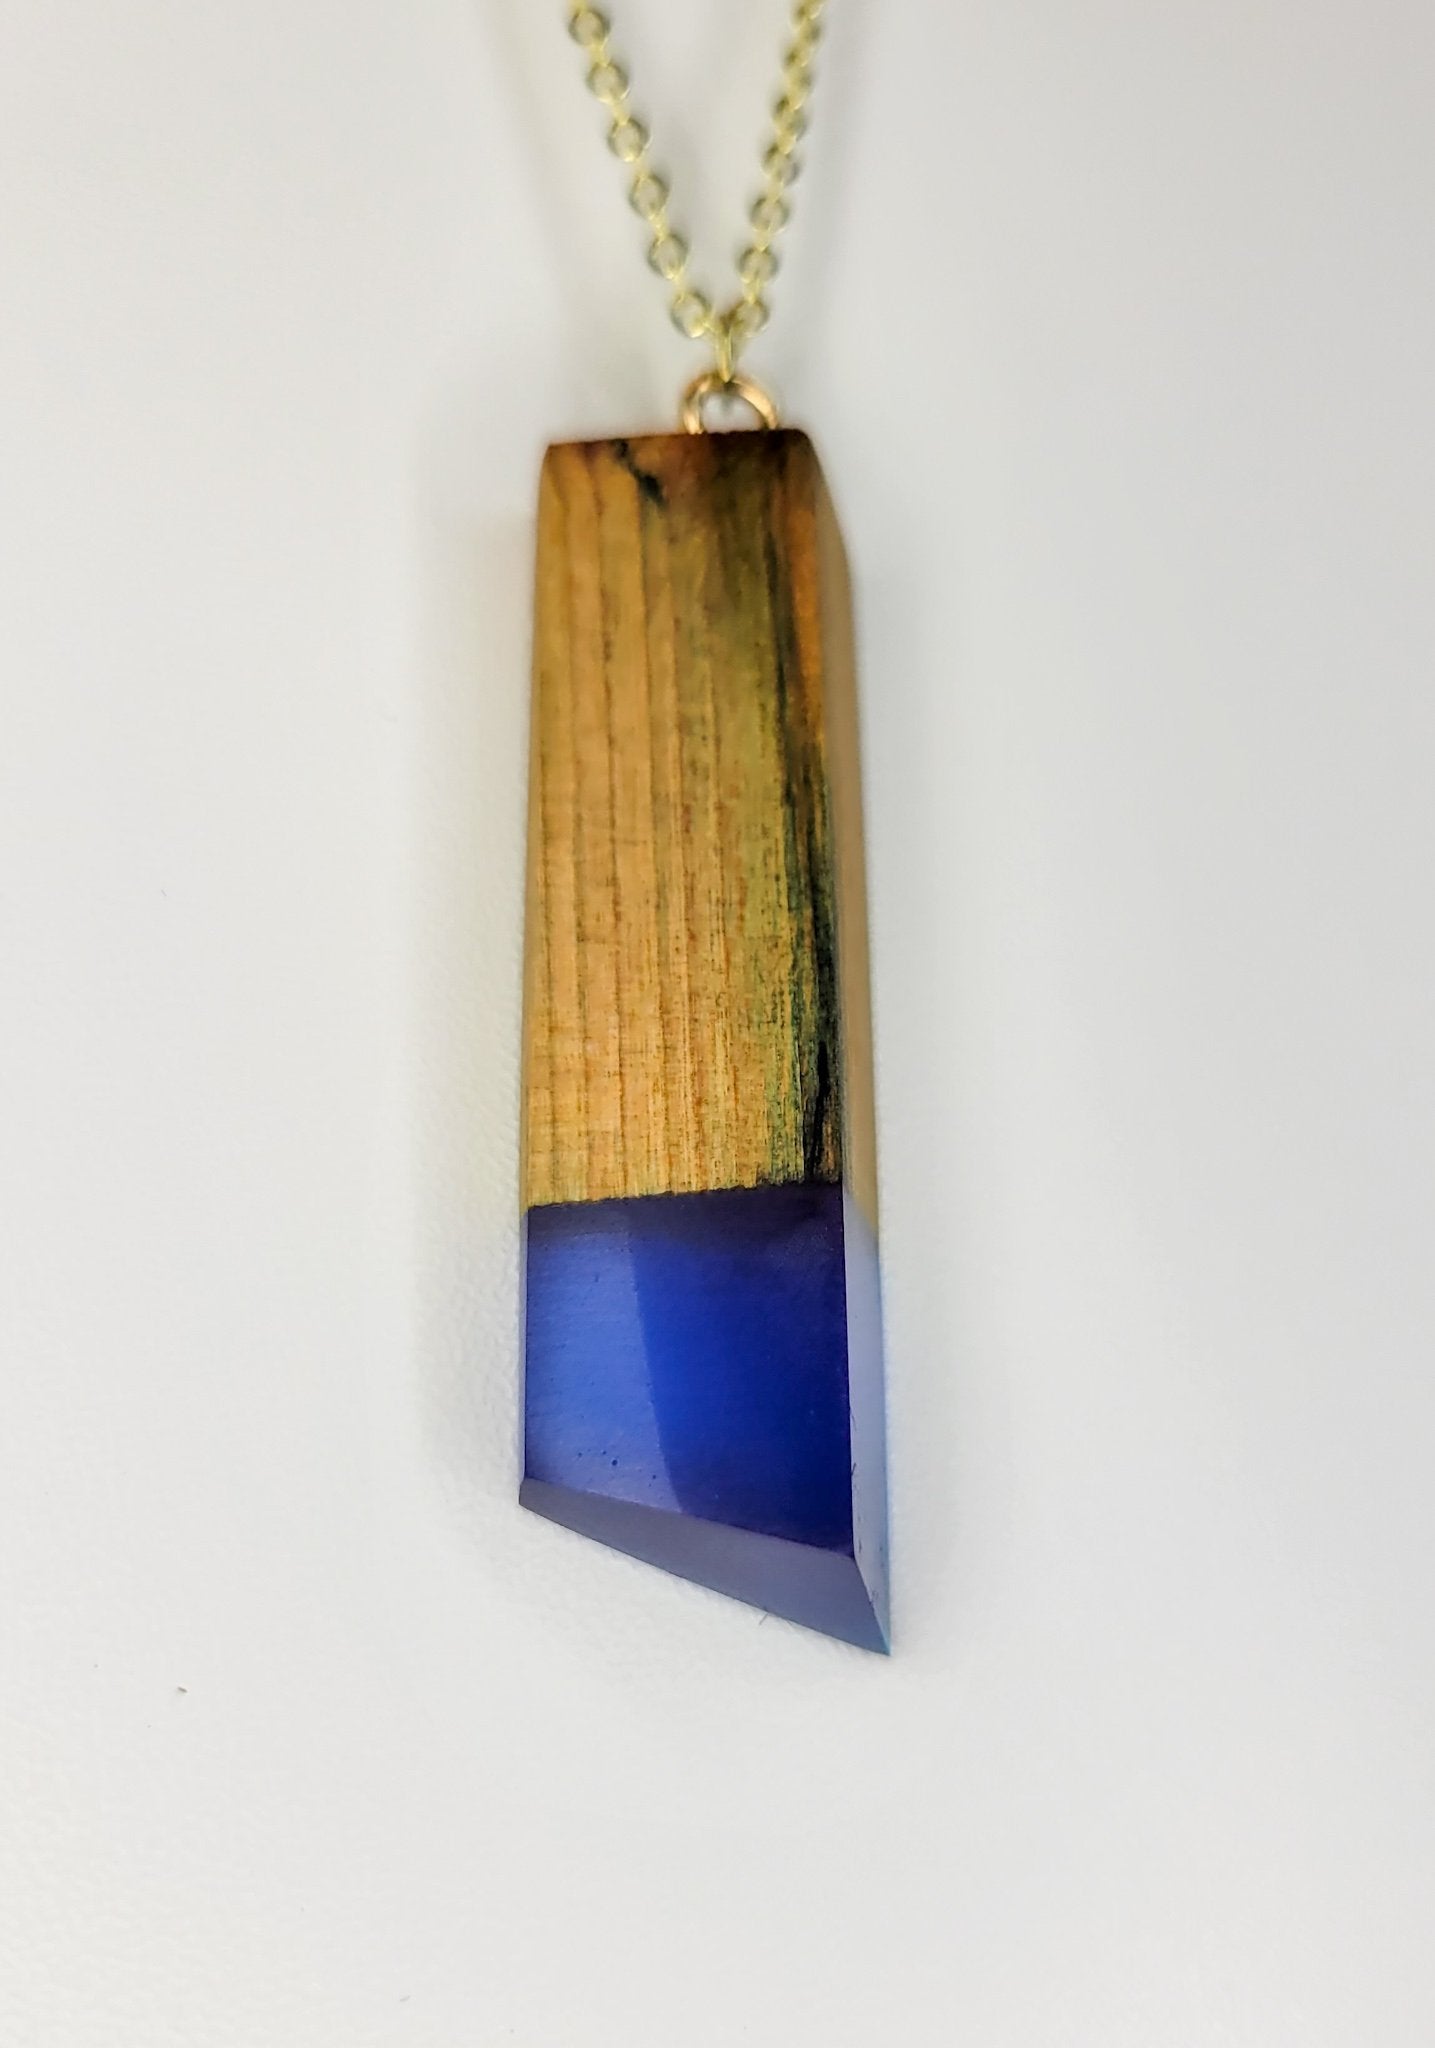 Naturally Fungus-Stained Wooden Pendant With Blue Epoxy